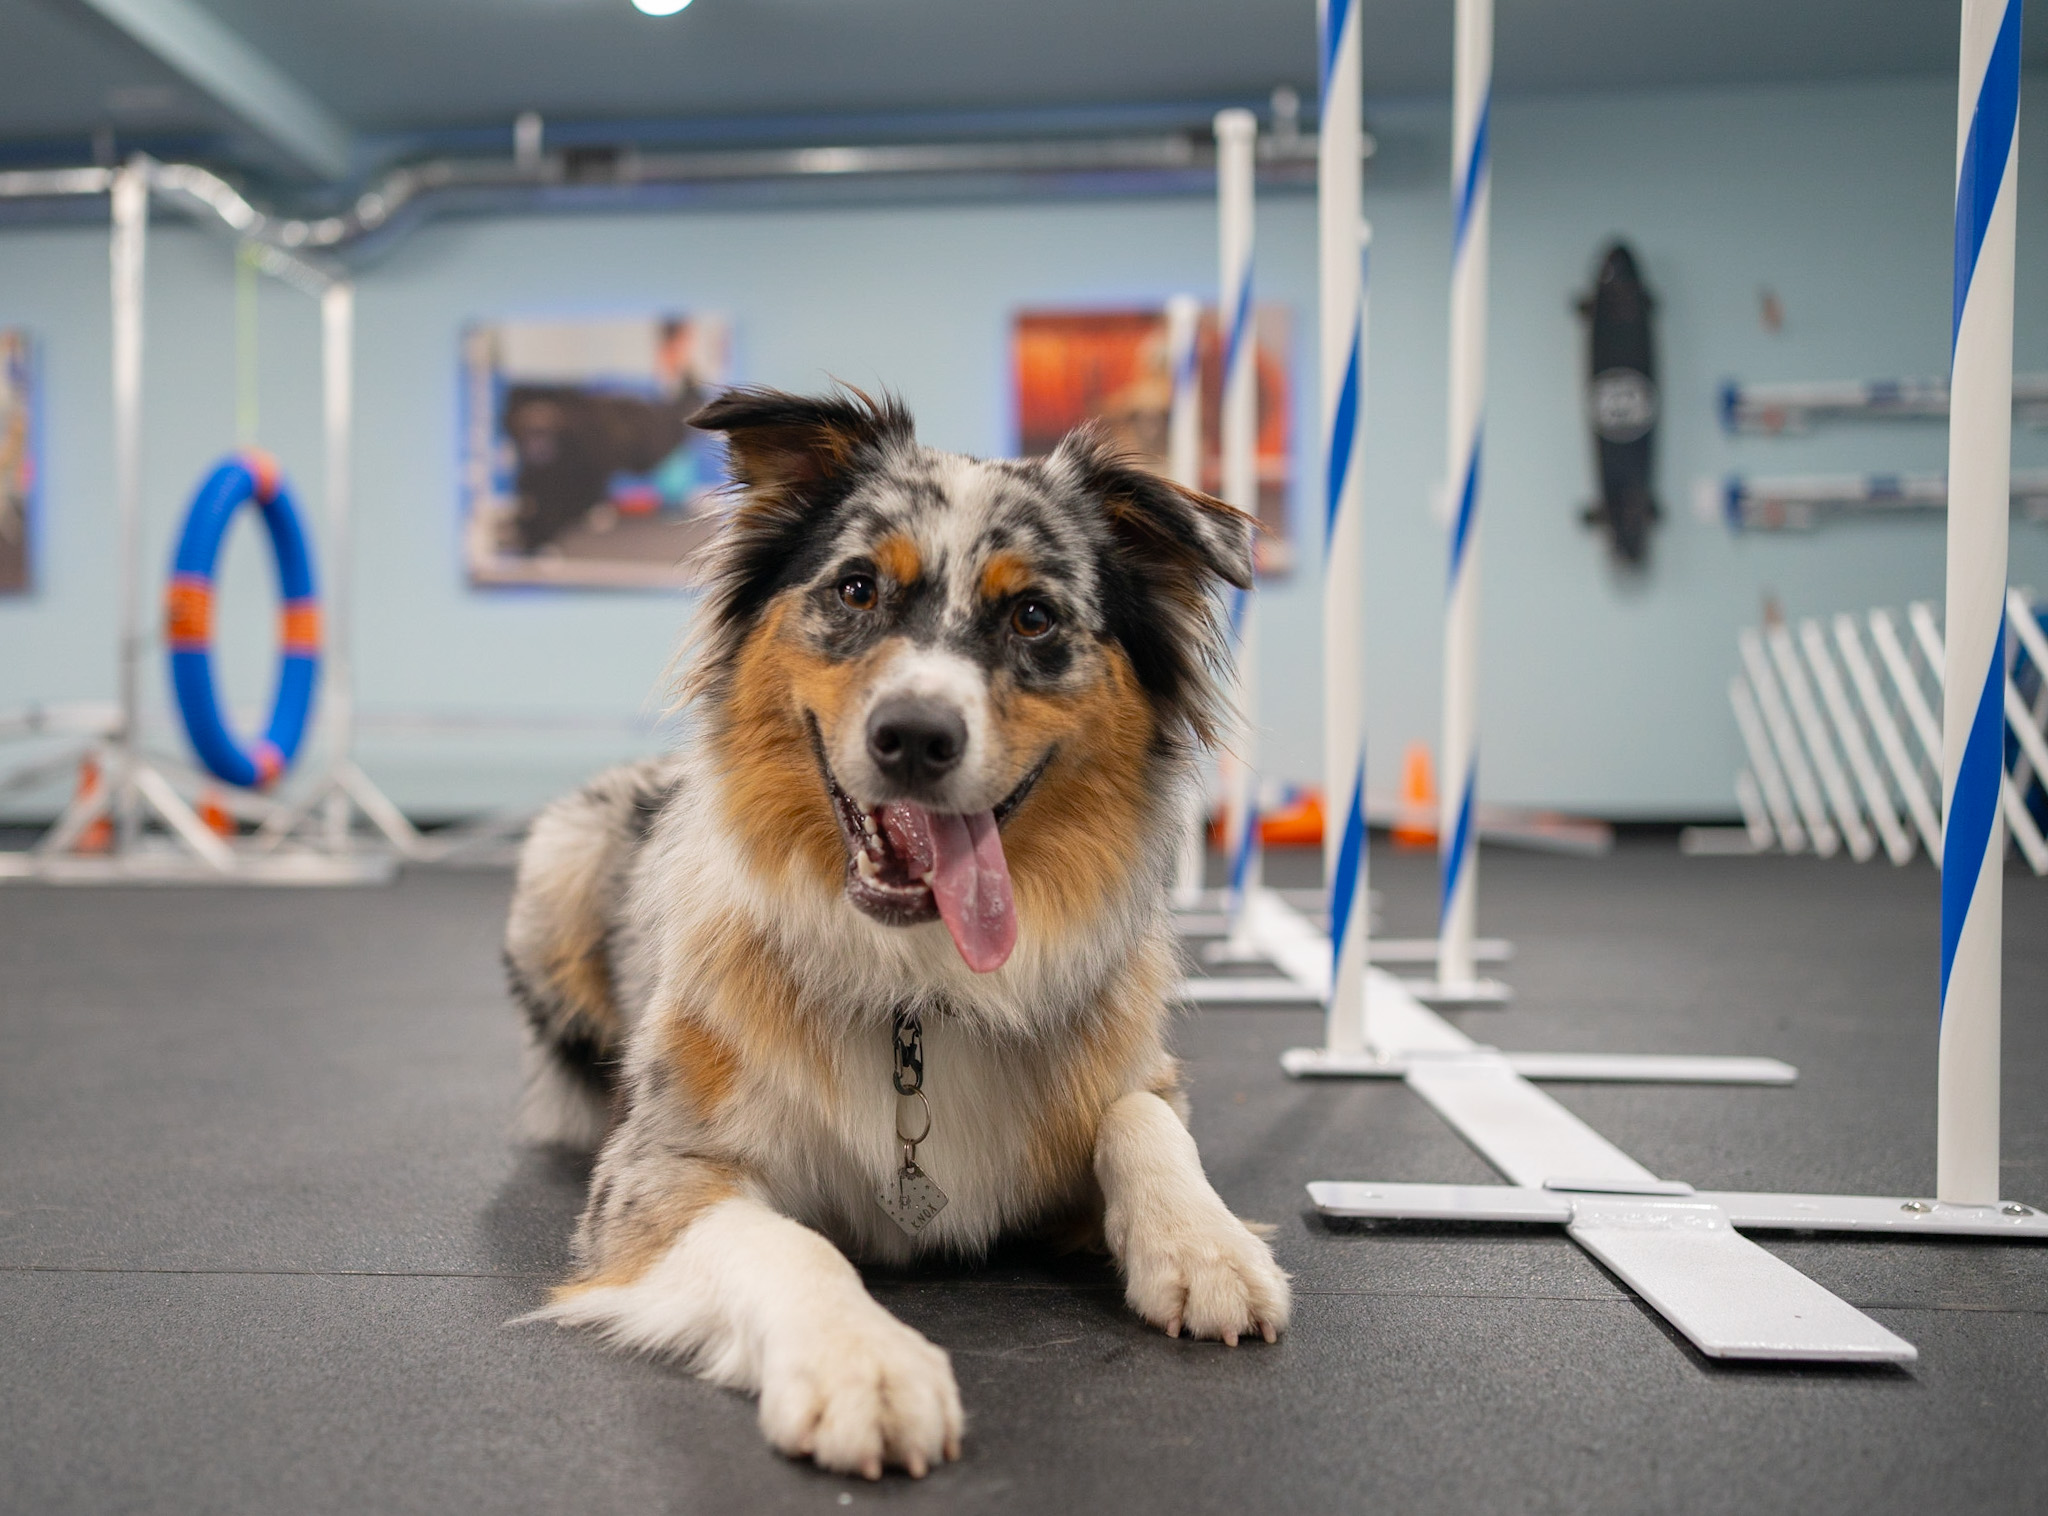 Enrichment for Dogs: How To Keep Your Australian Shepherd Engaged